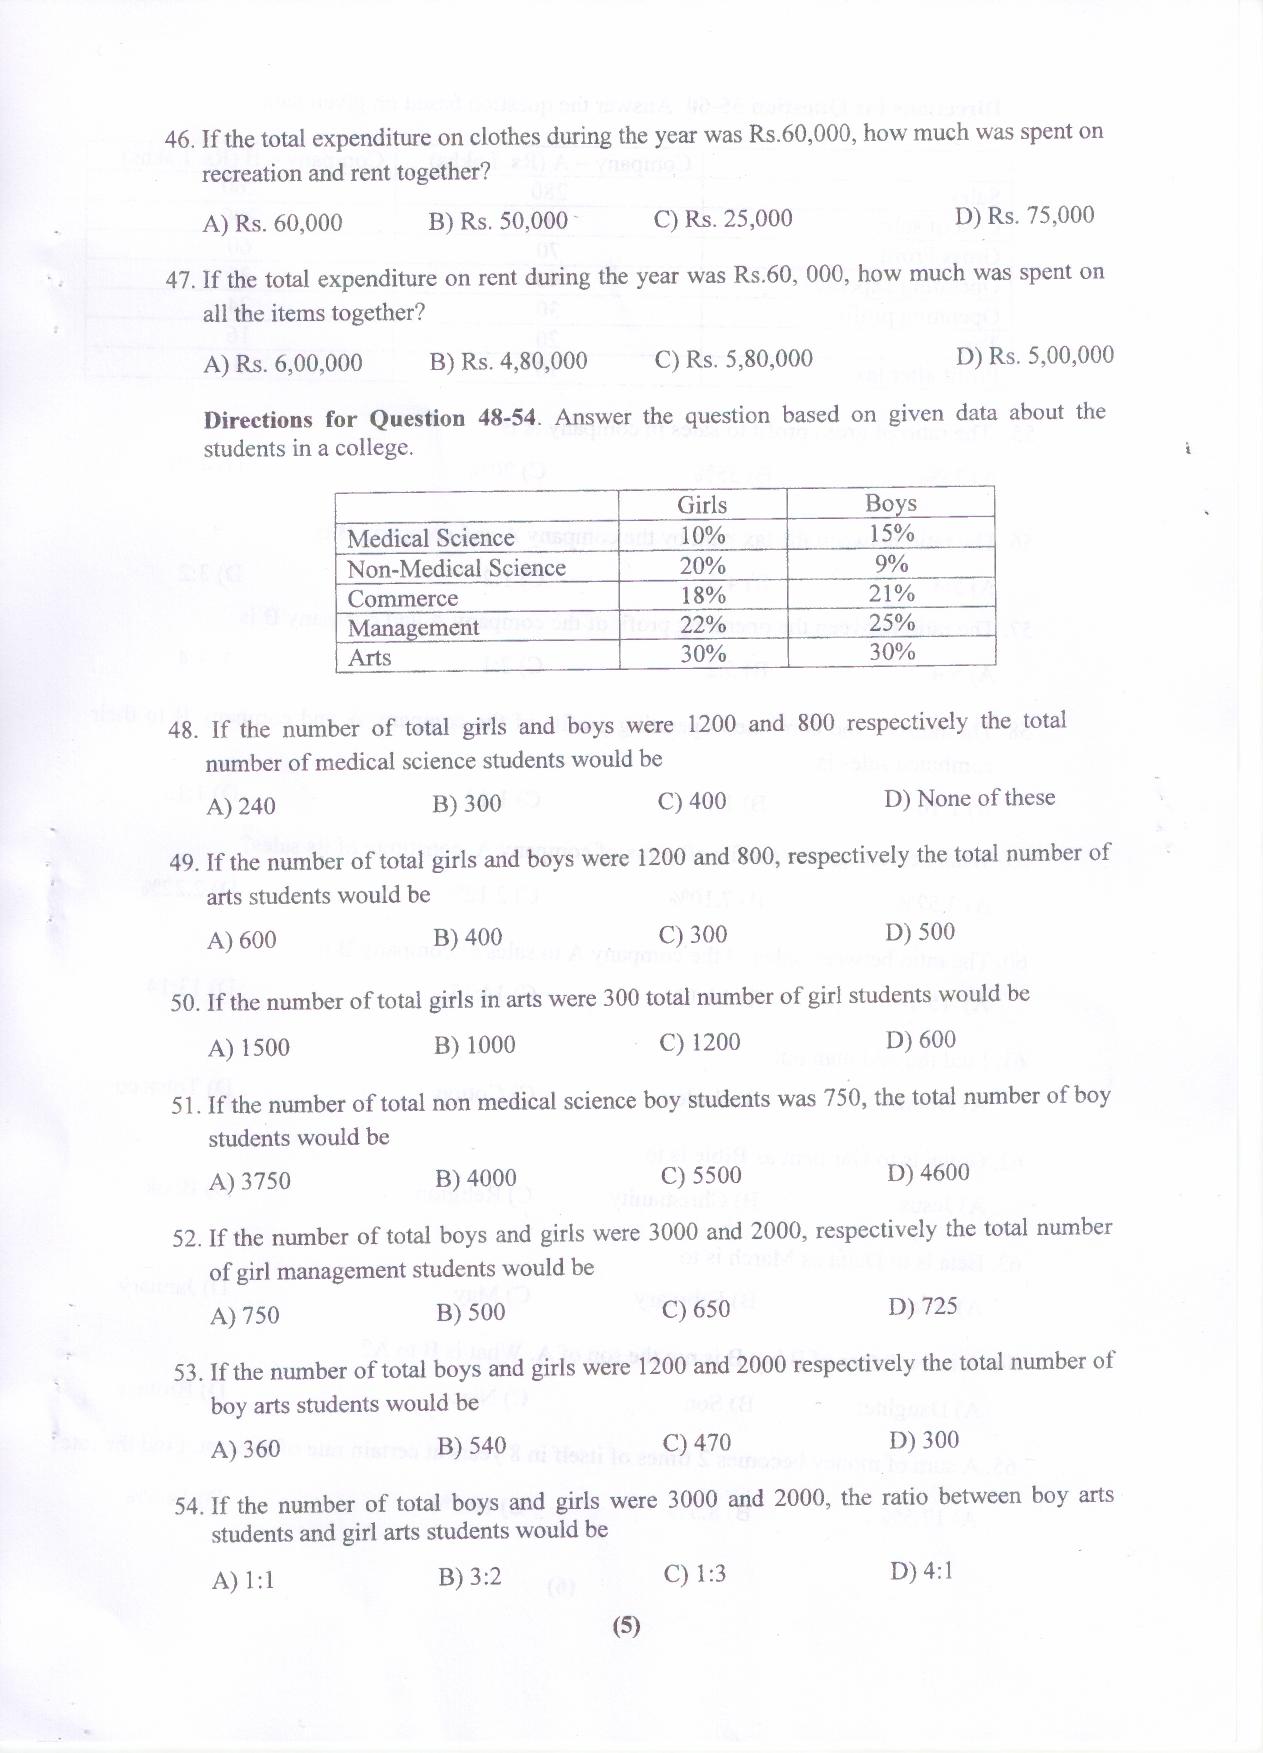 PU MET 2015 Question Booklet with Key - Page 6